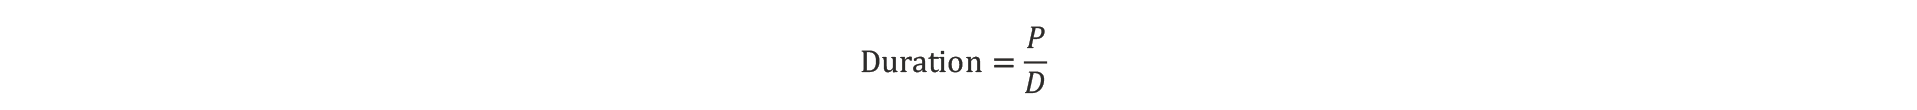 825-as-duration-dies-equities-rise-equation-3